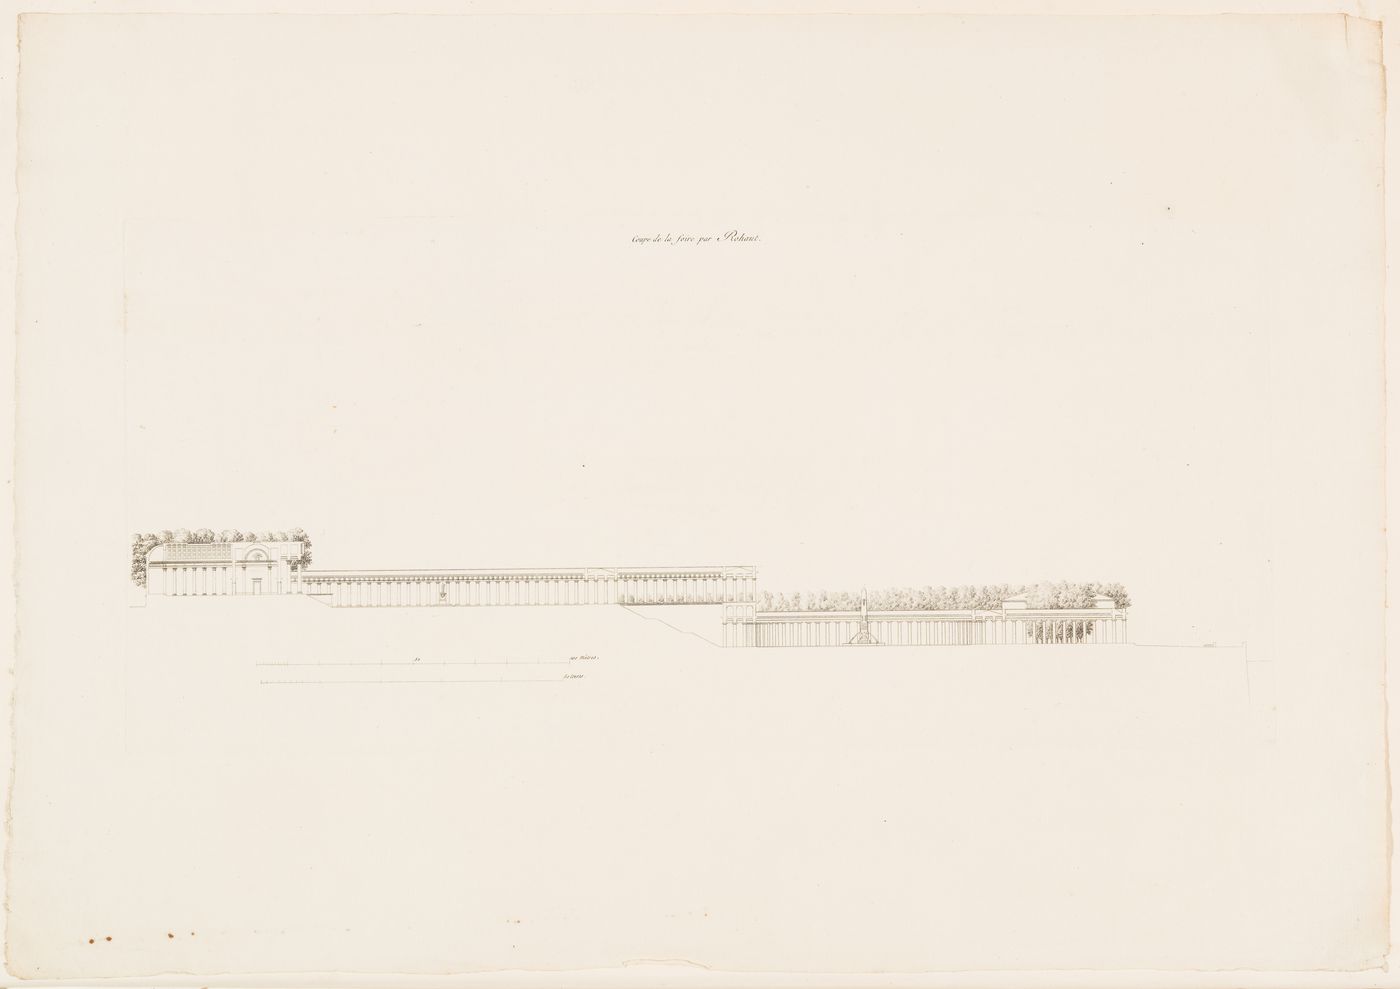 1802 Grand Prix Competition: Site plan for a public fair located on the banks of a large river; verso: 1802 Grand Prix Competition: Sectional elevation for a public fair located on the banks of a large river